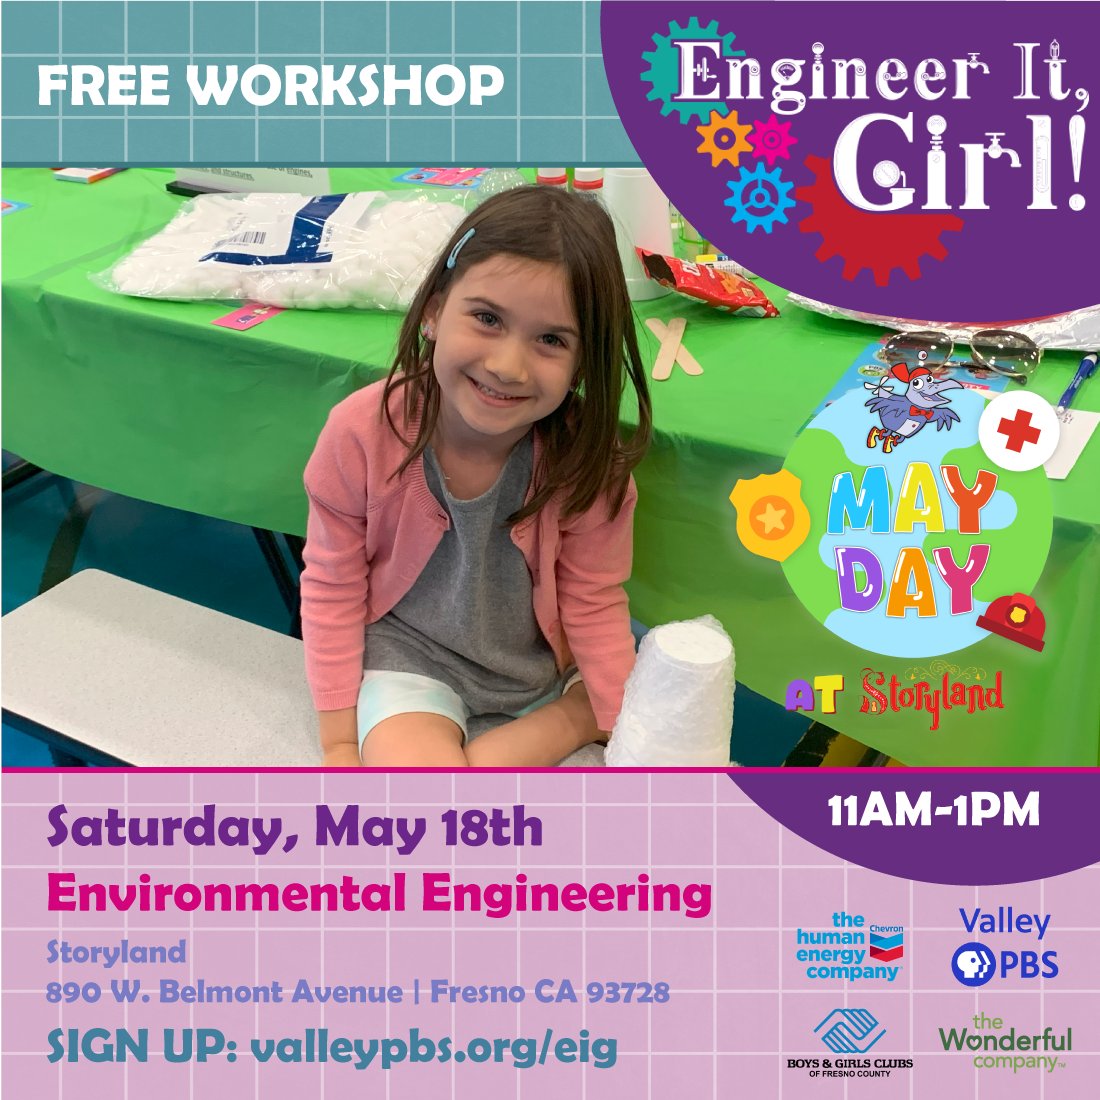 Don't forget that on May 18, 2024 Valley PBS and Chevron will be traveling to Storyland during May Day for Environmental Engineering. Let’s Engineer It, Girl! Sign-up: valleypbs.org/eig